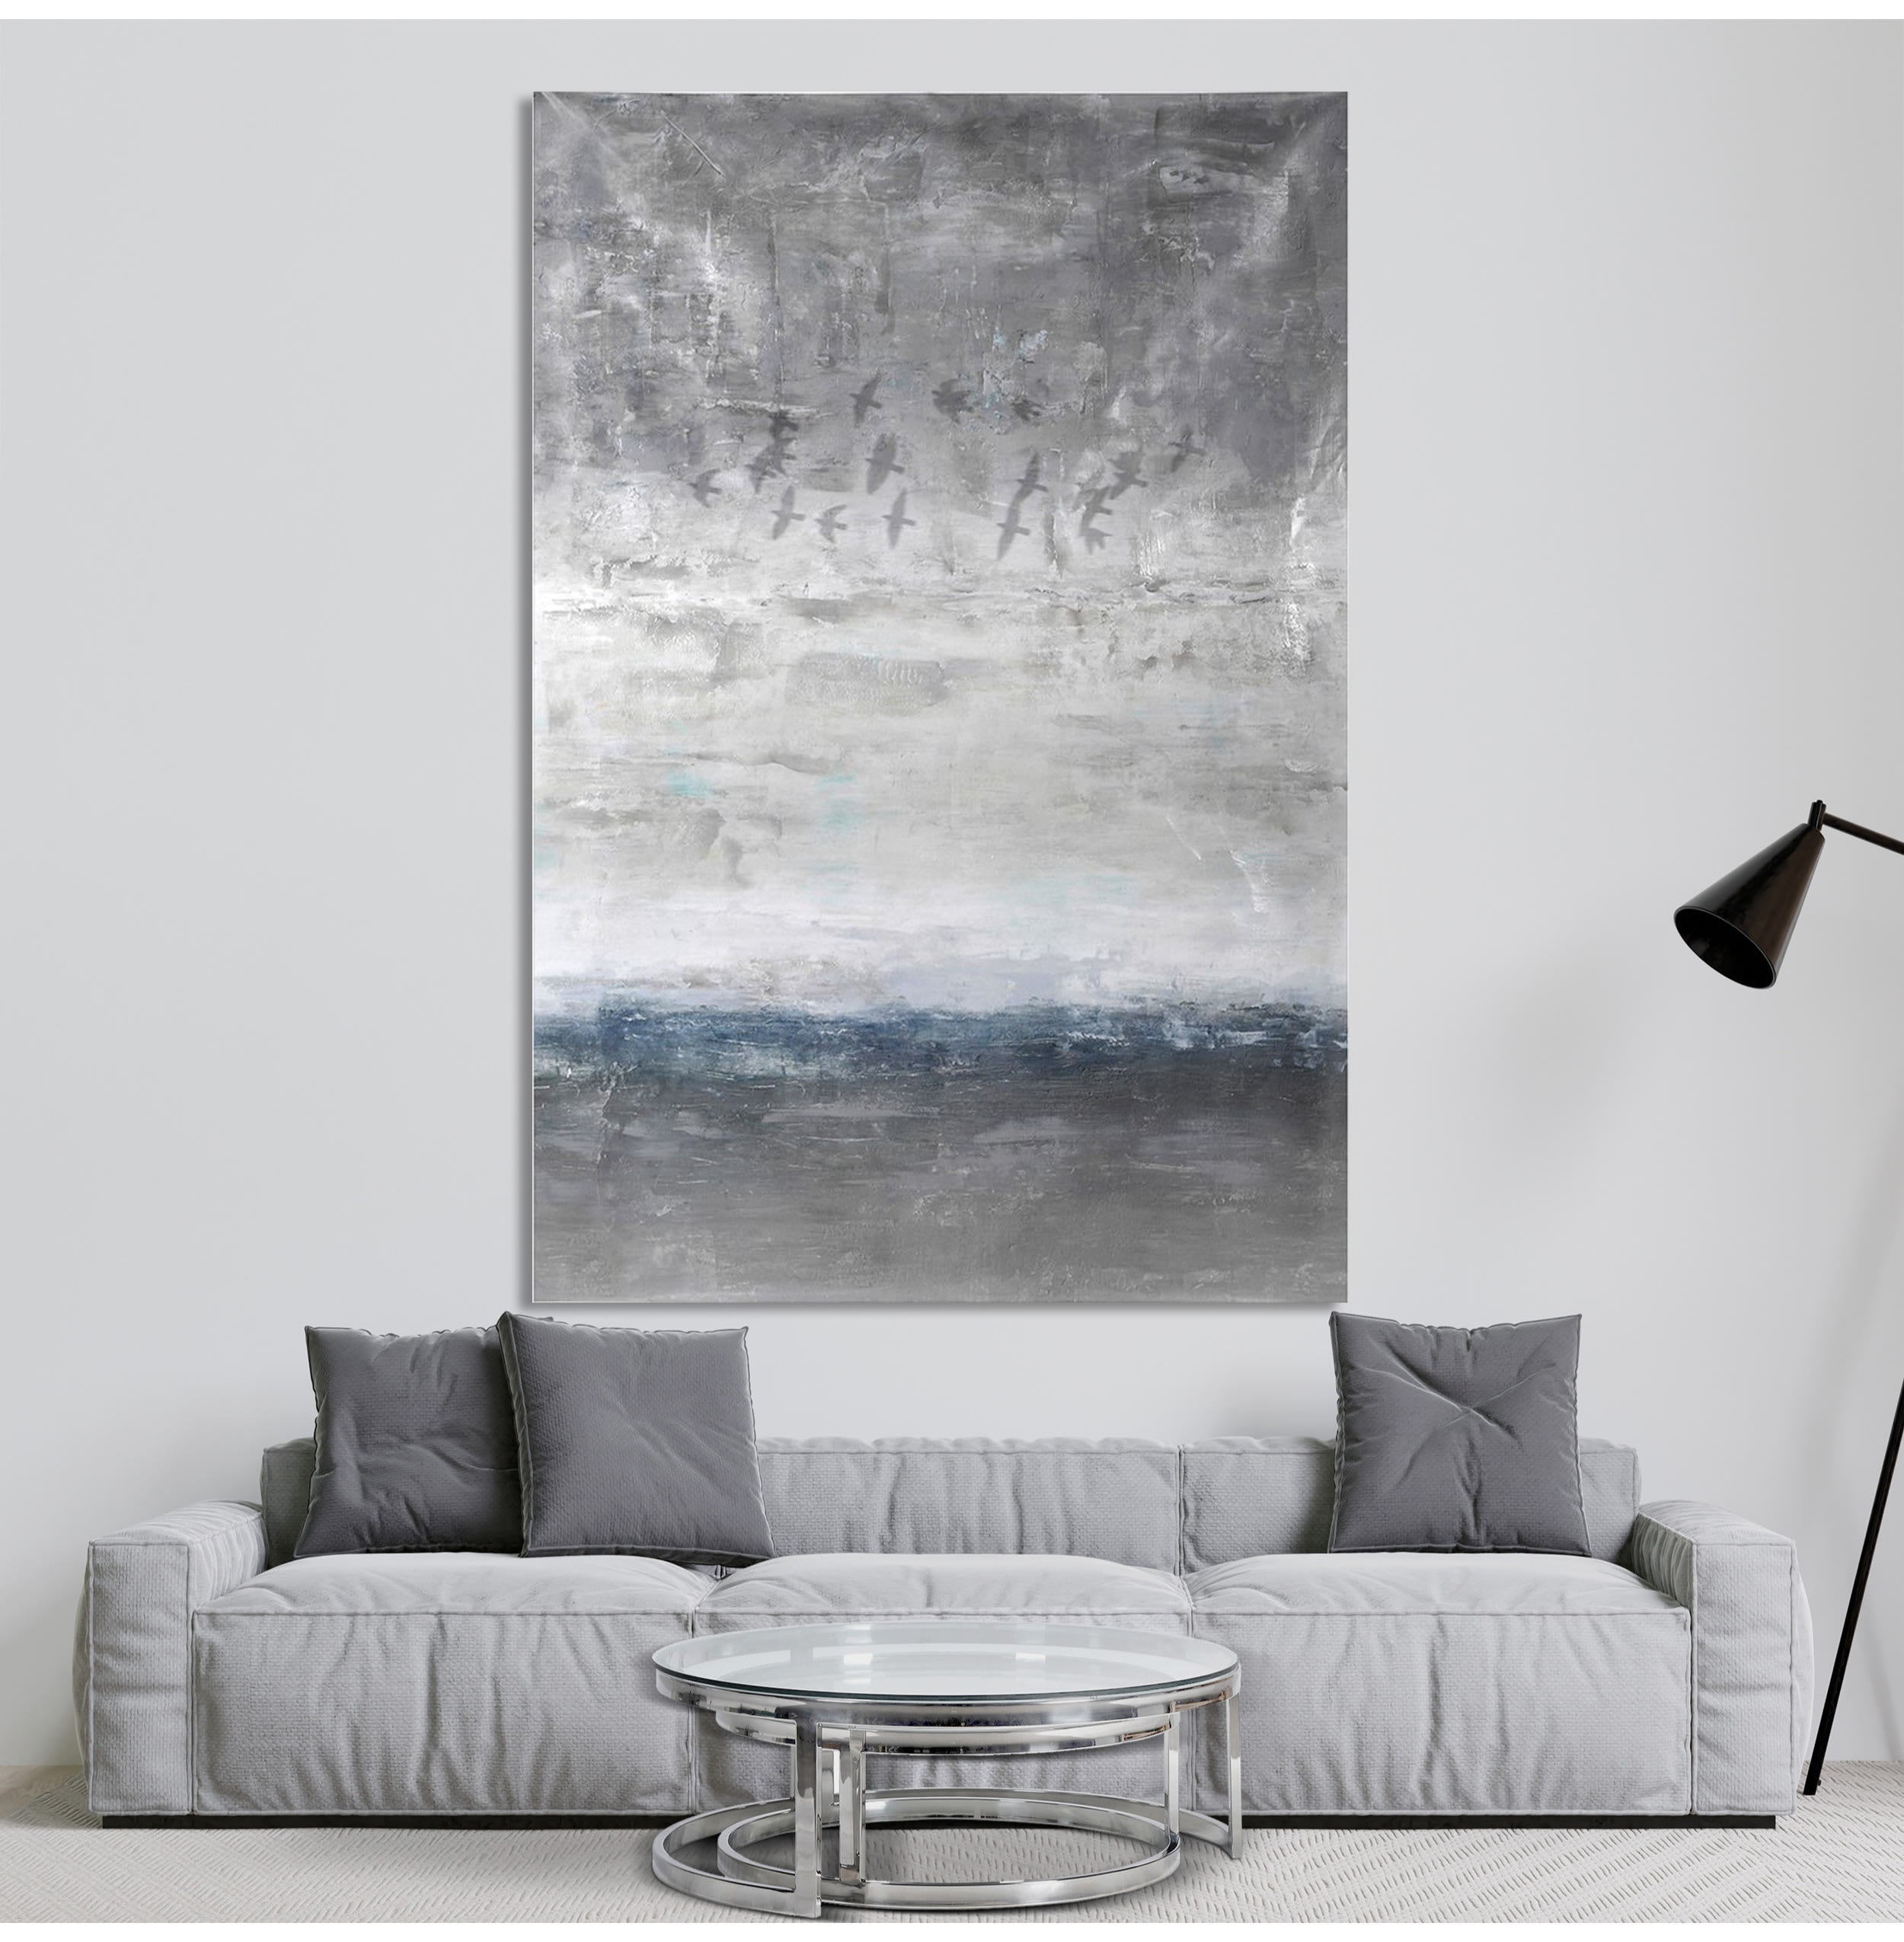 Migrating Birds In Olis Large Wall Art